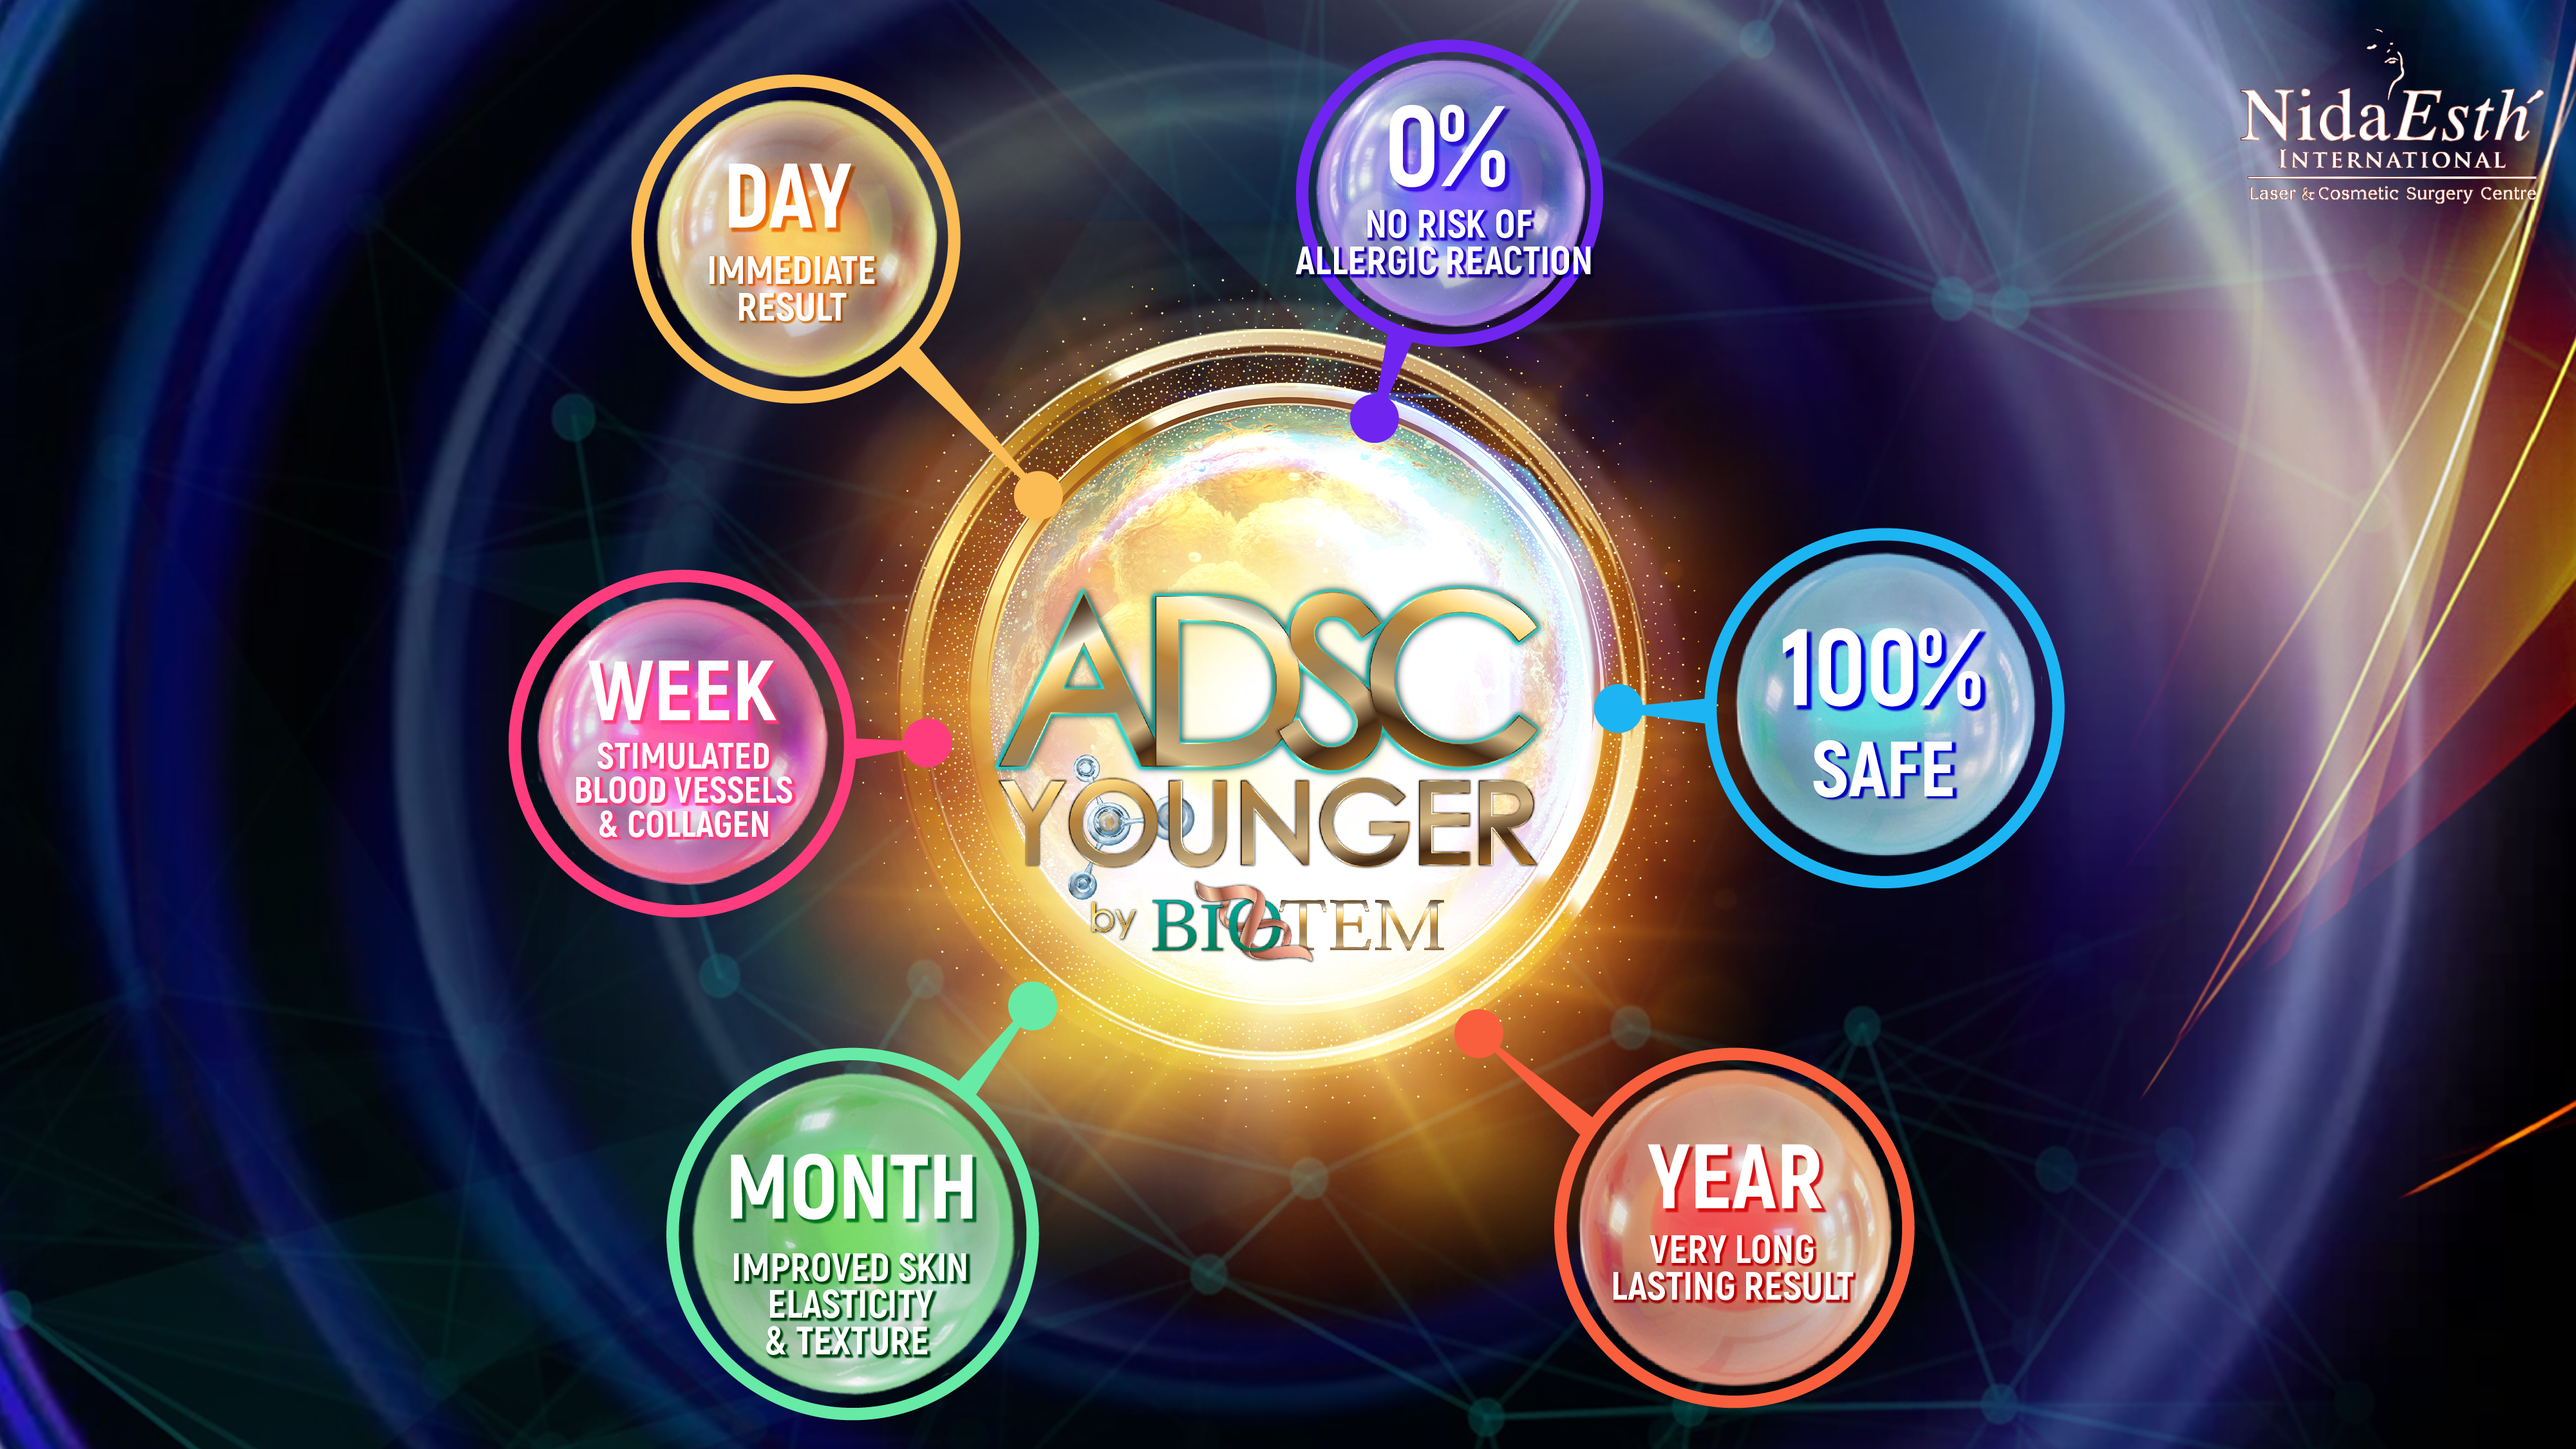 Process of ADSC YOUNGER By Bio-Z-tem